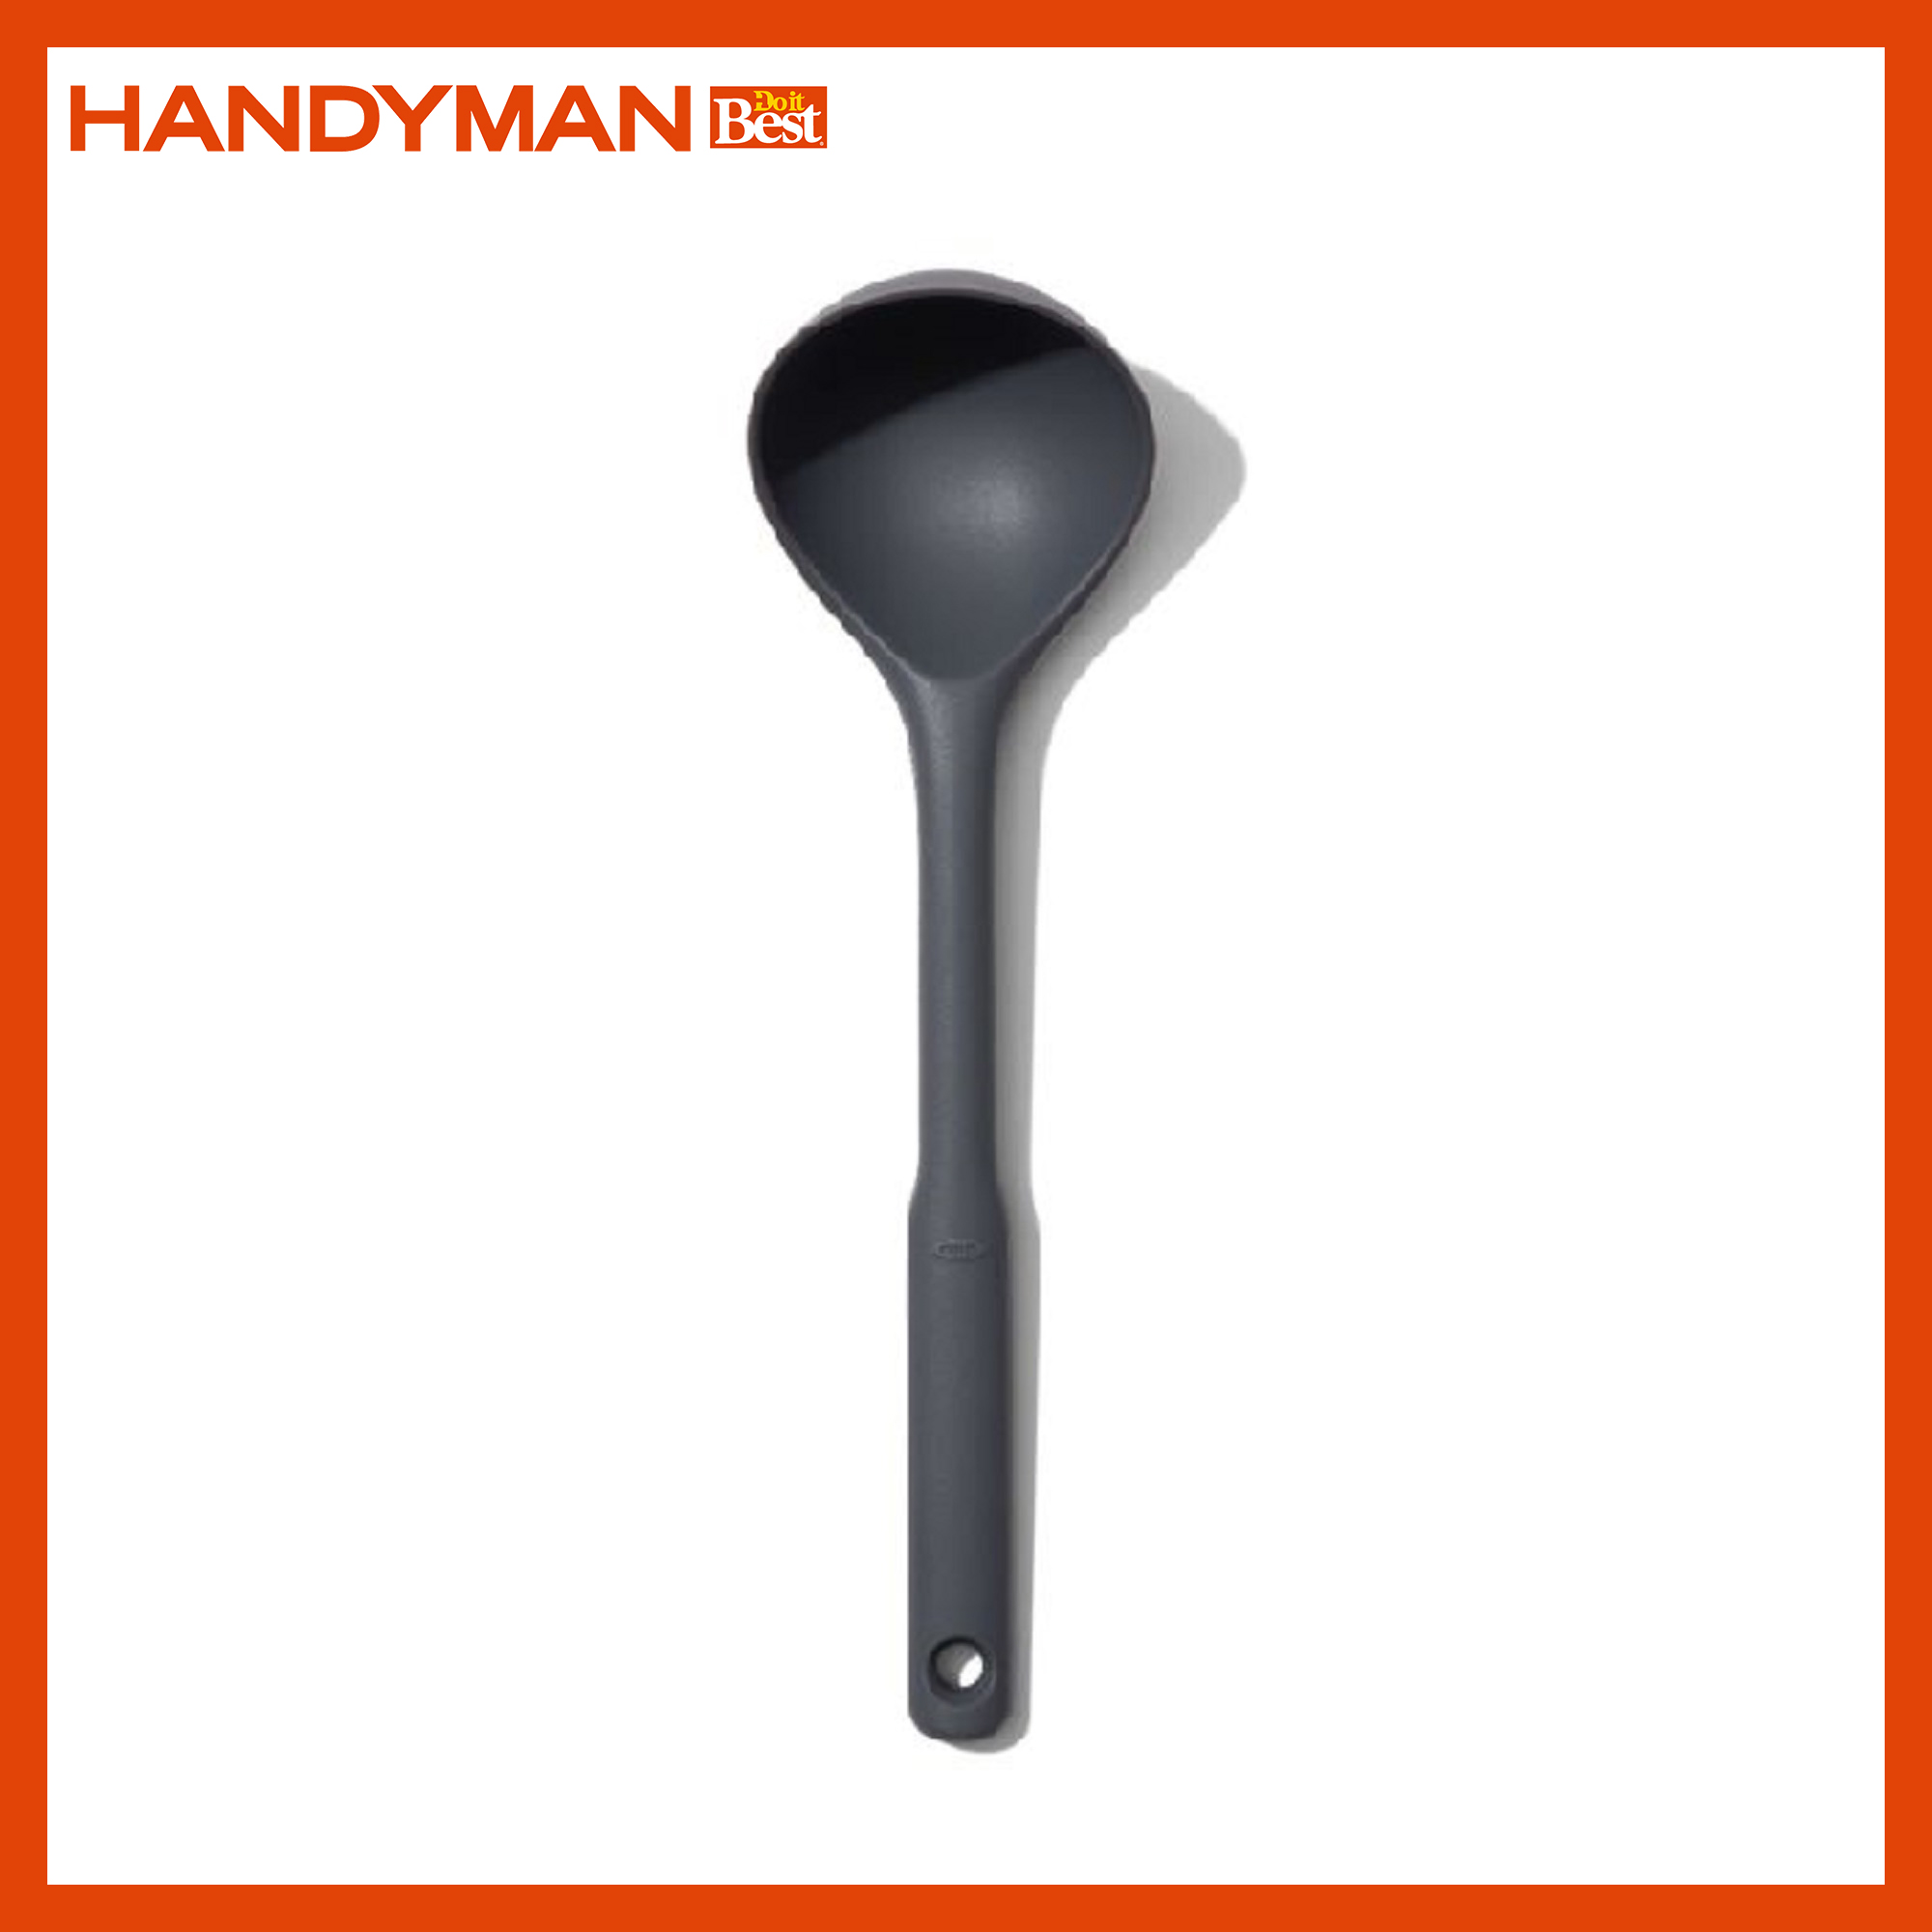 OXO Good Grips Silicone Everyday Ladle